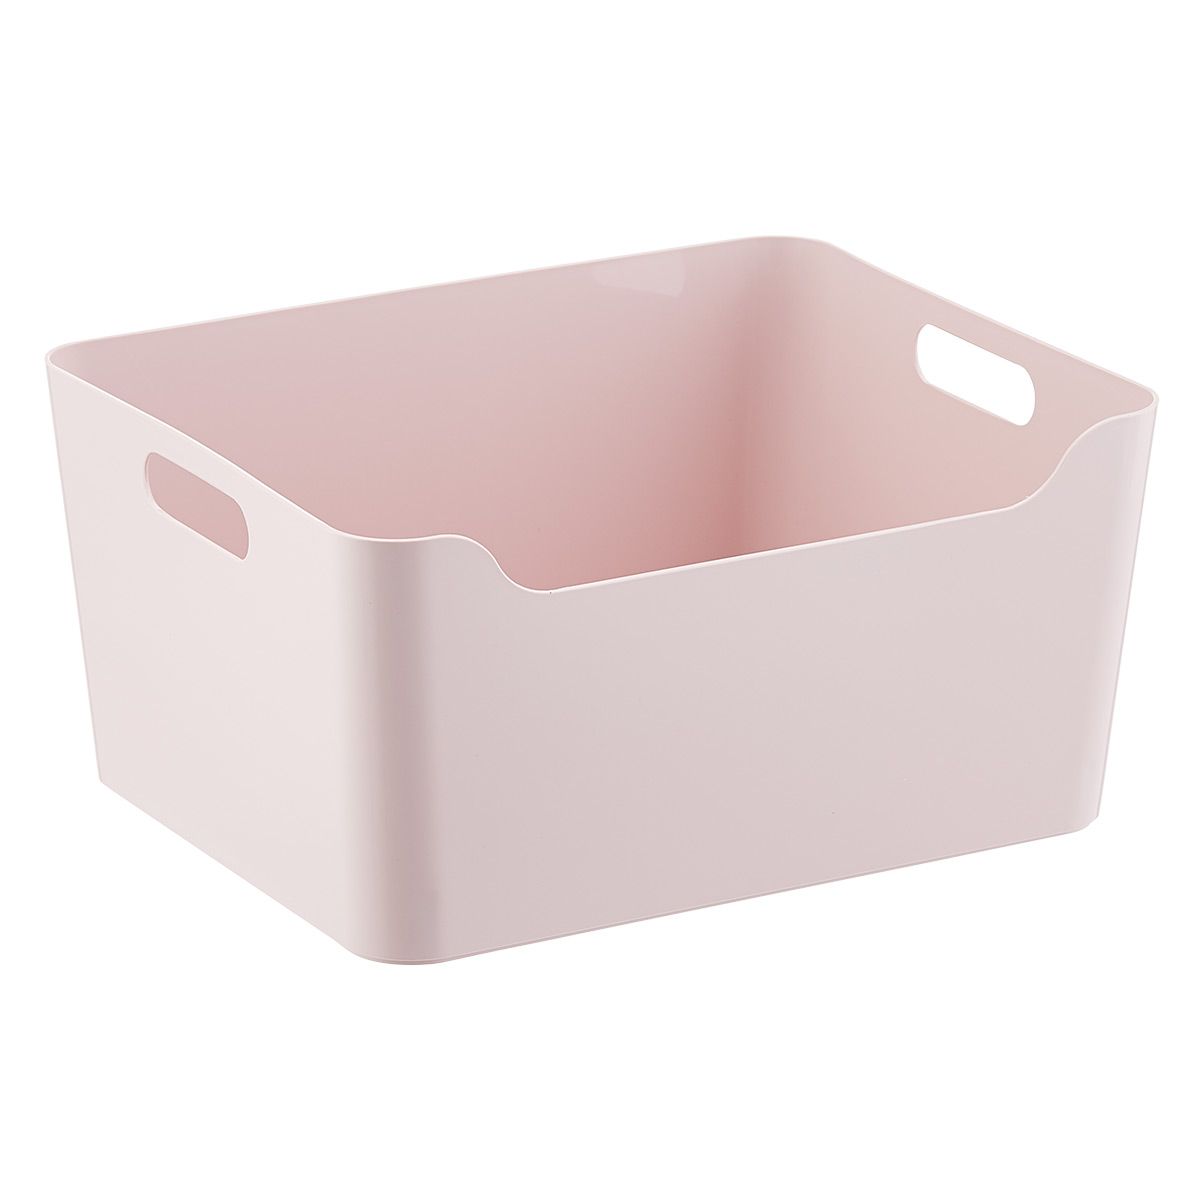 Large Plastic Storage Bin w/ Handles Soft Pink | The Container Store